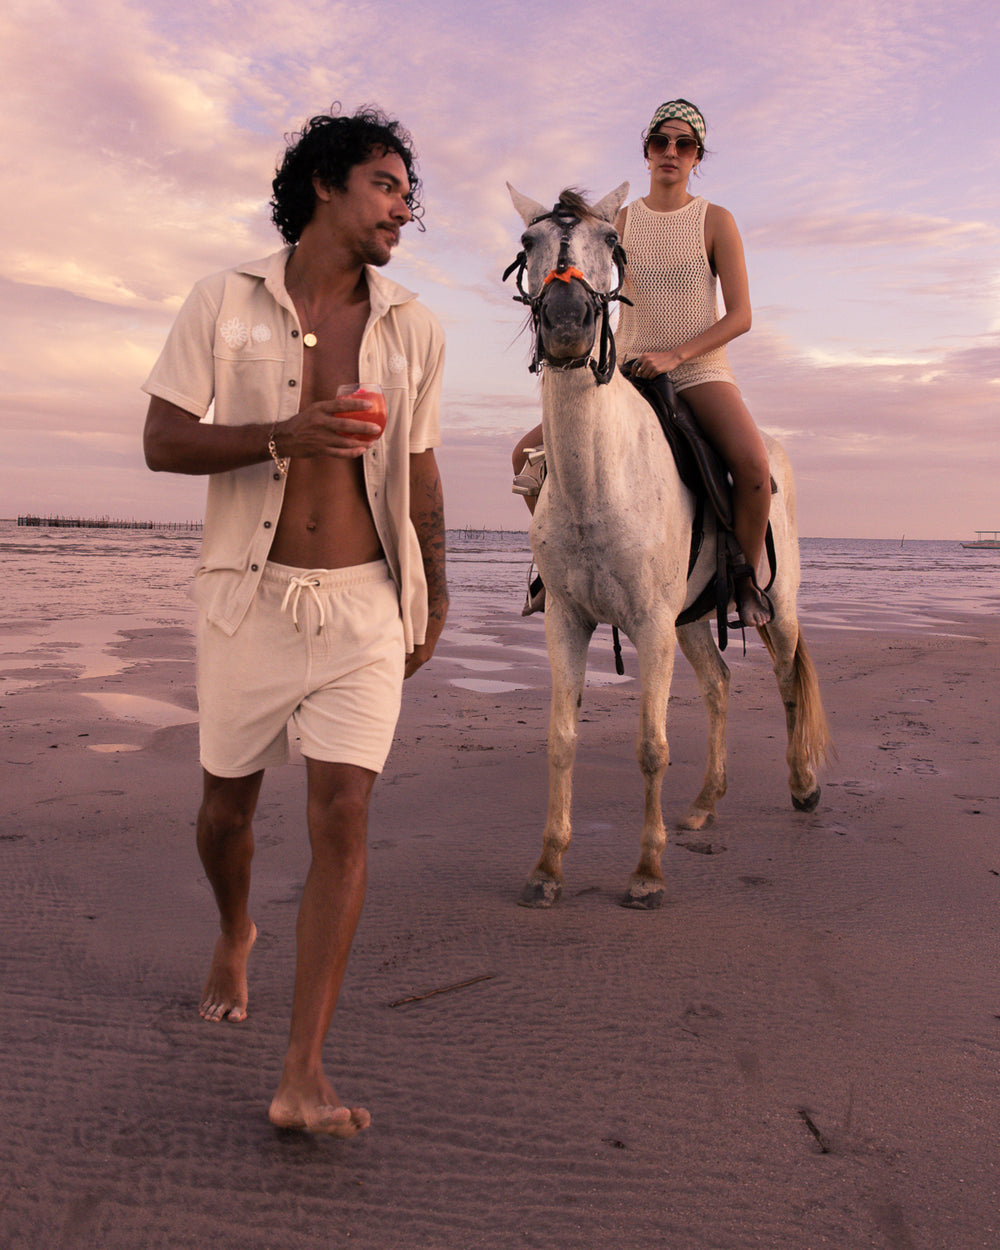 man in the Alabaster Gaucho Set on beach with a woman riding a horse